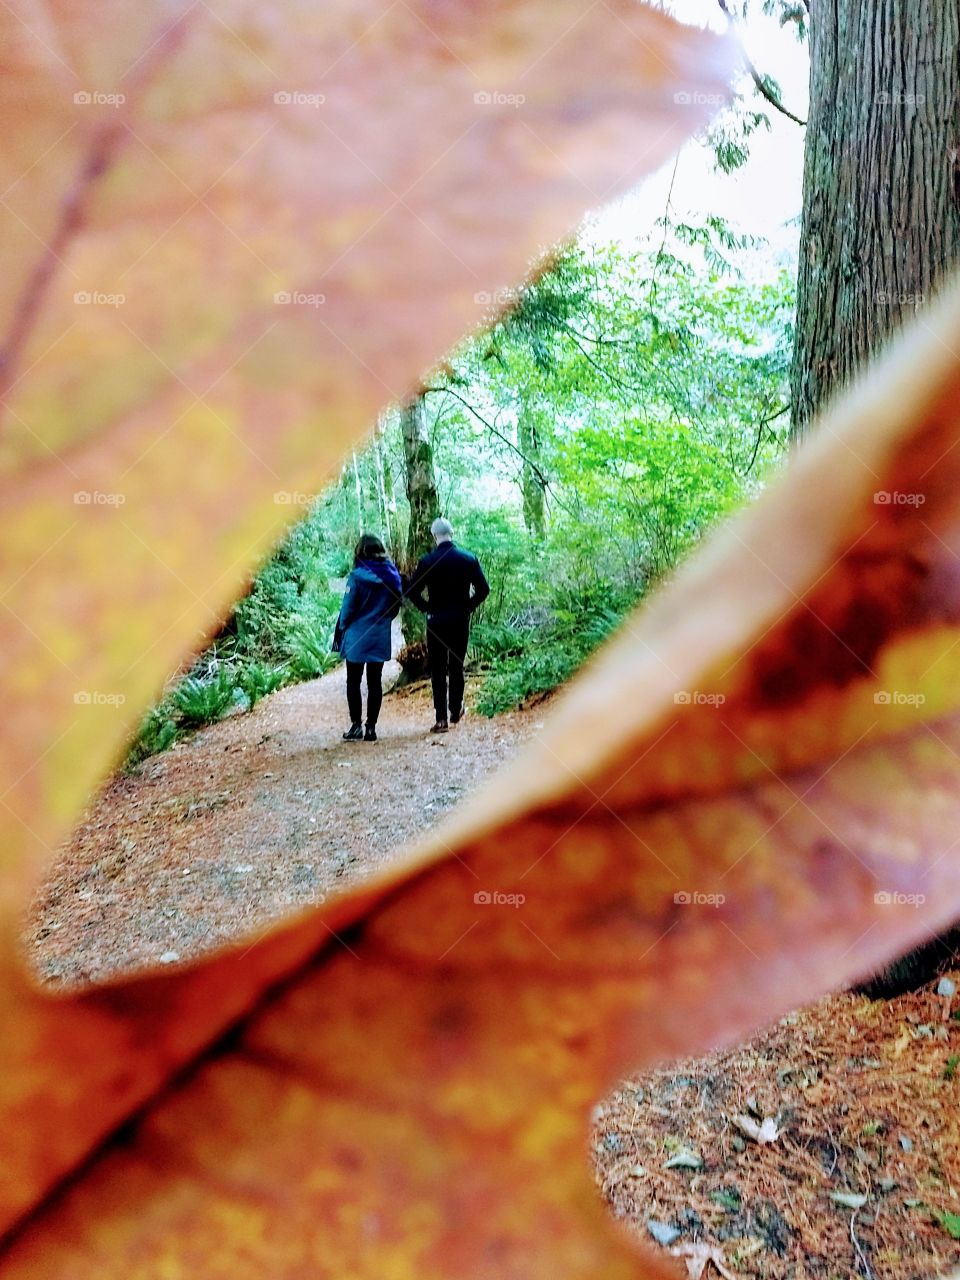 A man and woman can be seen through an autumn leaf walking together on a forest parh.